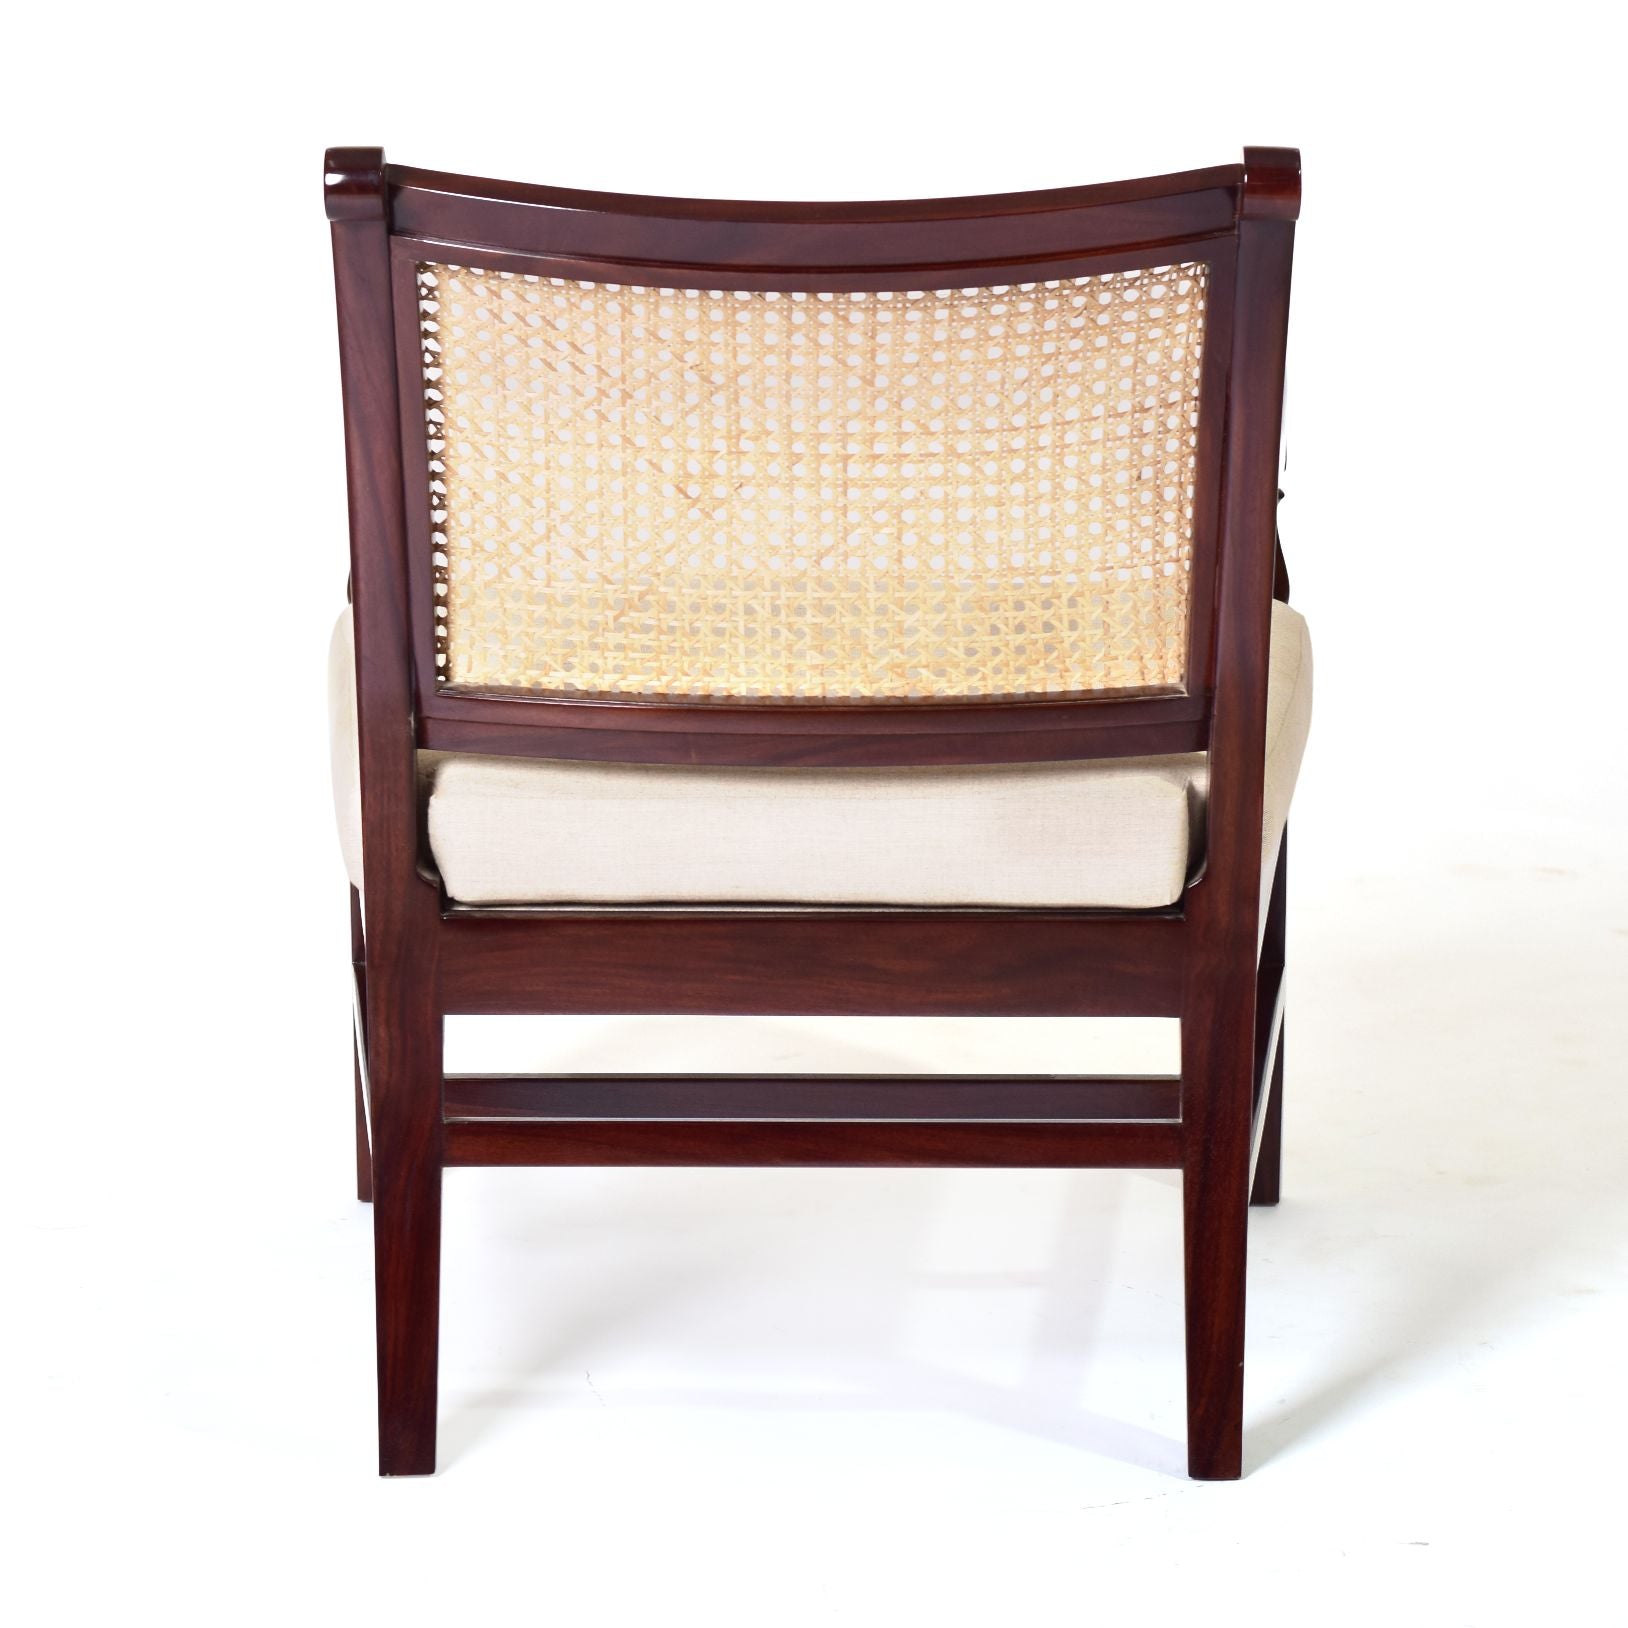 Gonsalves Lounge Chair Furniture dining chair - stationery product online - buy furniture online - wooden furniture for home - home furniture online - cane furniture - Vintage chair - Goan style furniture - trending furniture